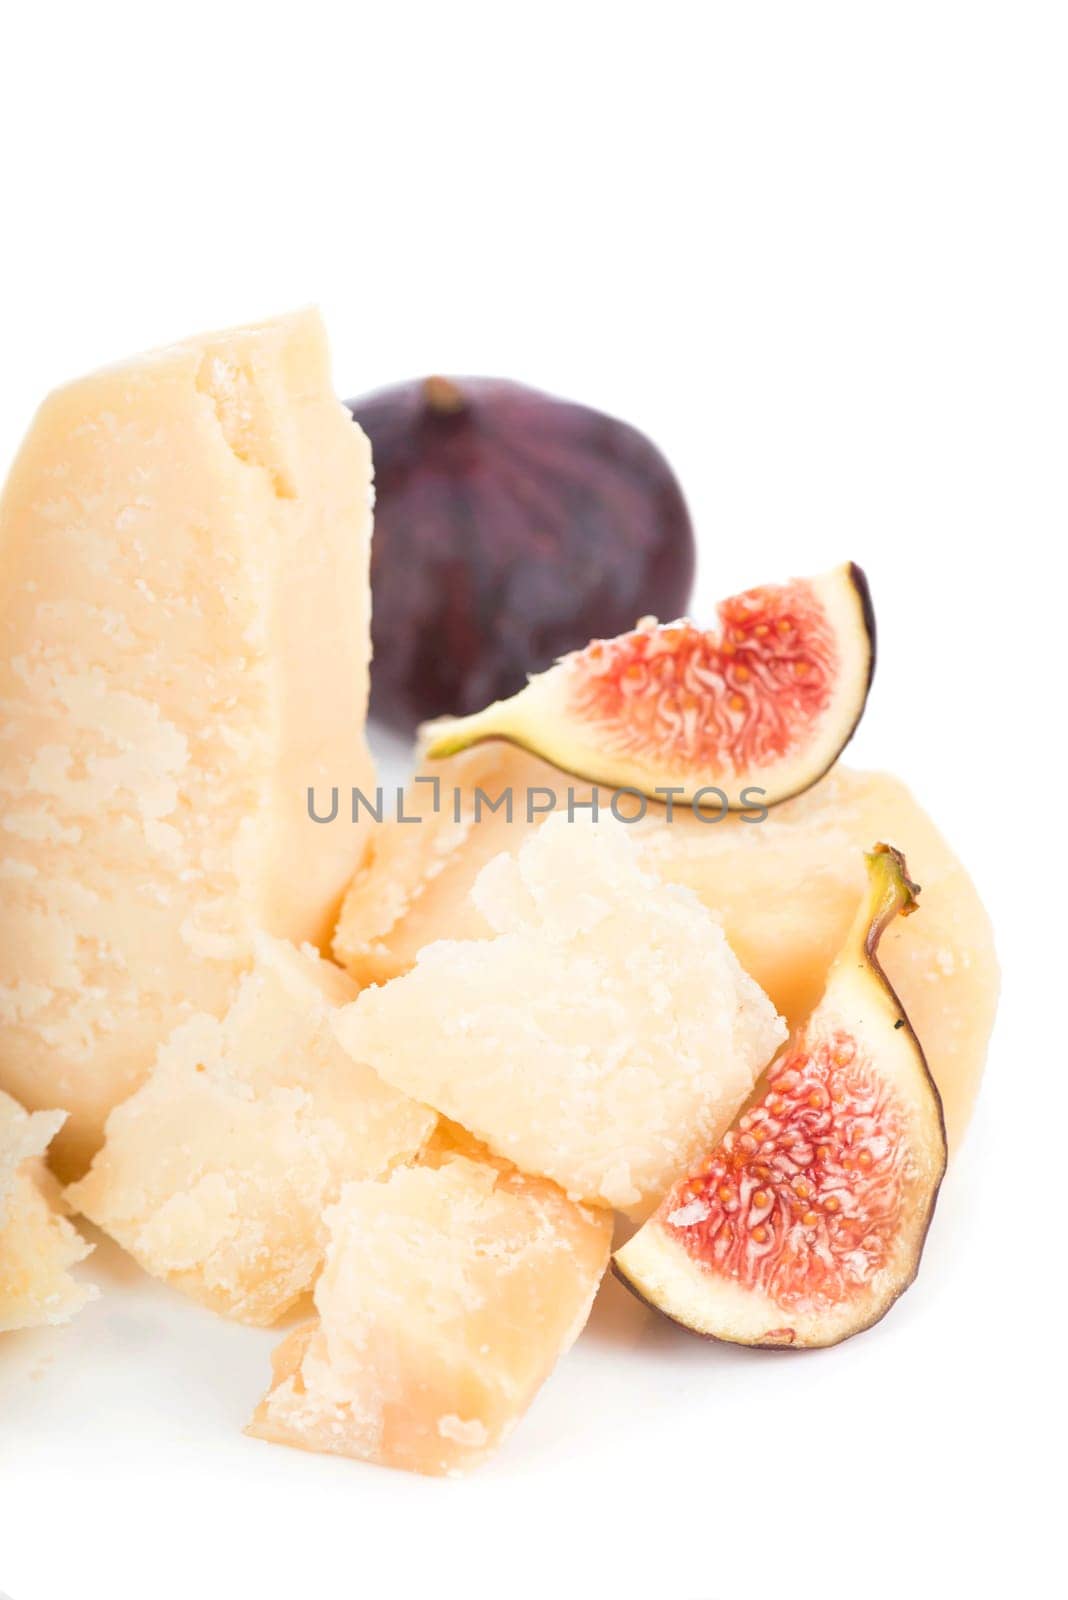 Figs and Parmesan. Parmesan cheese and blue figs isolated on a white backgroun. View from above by aprilphoto